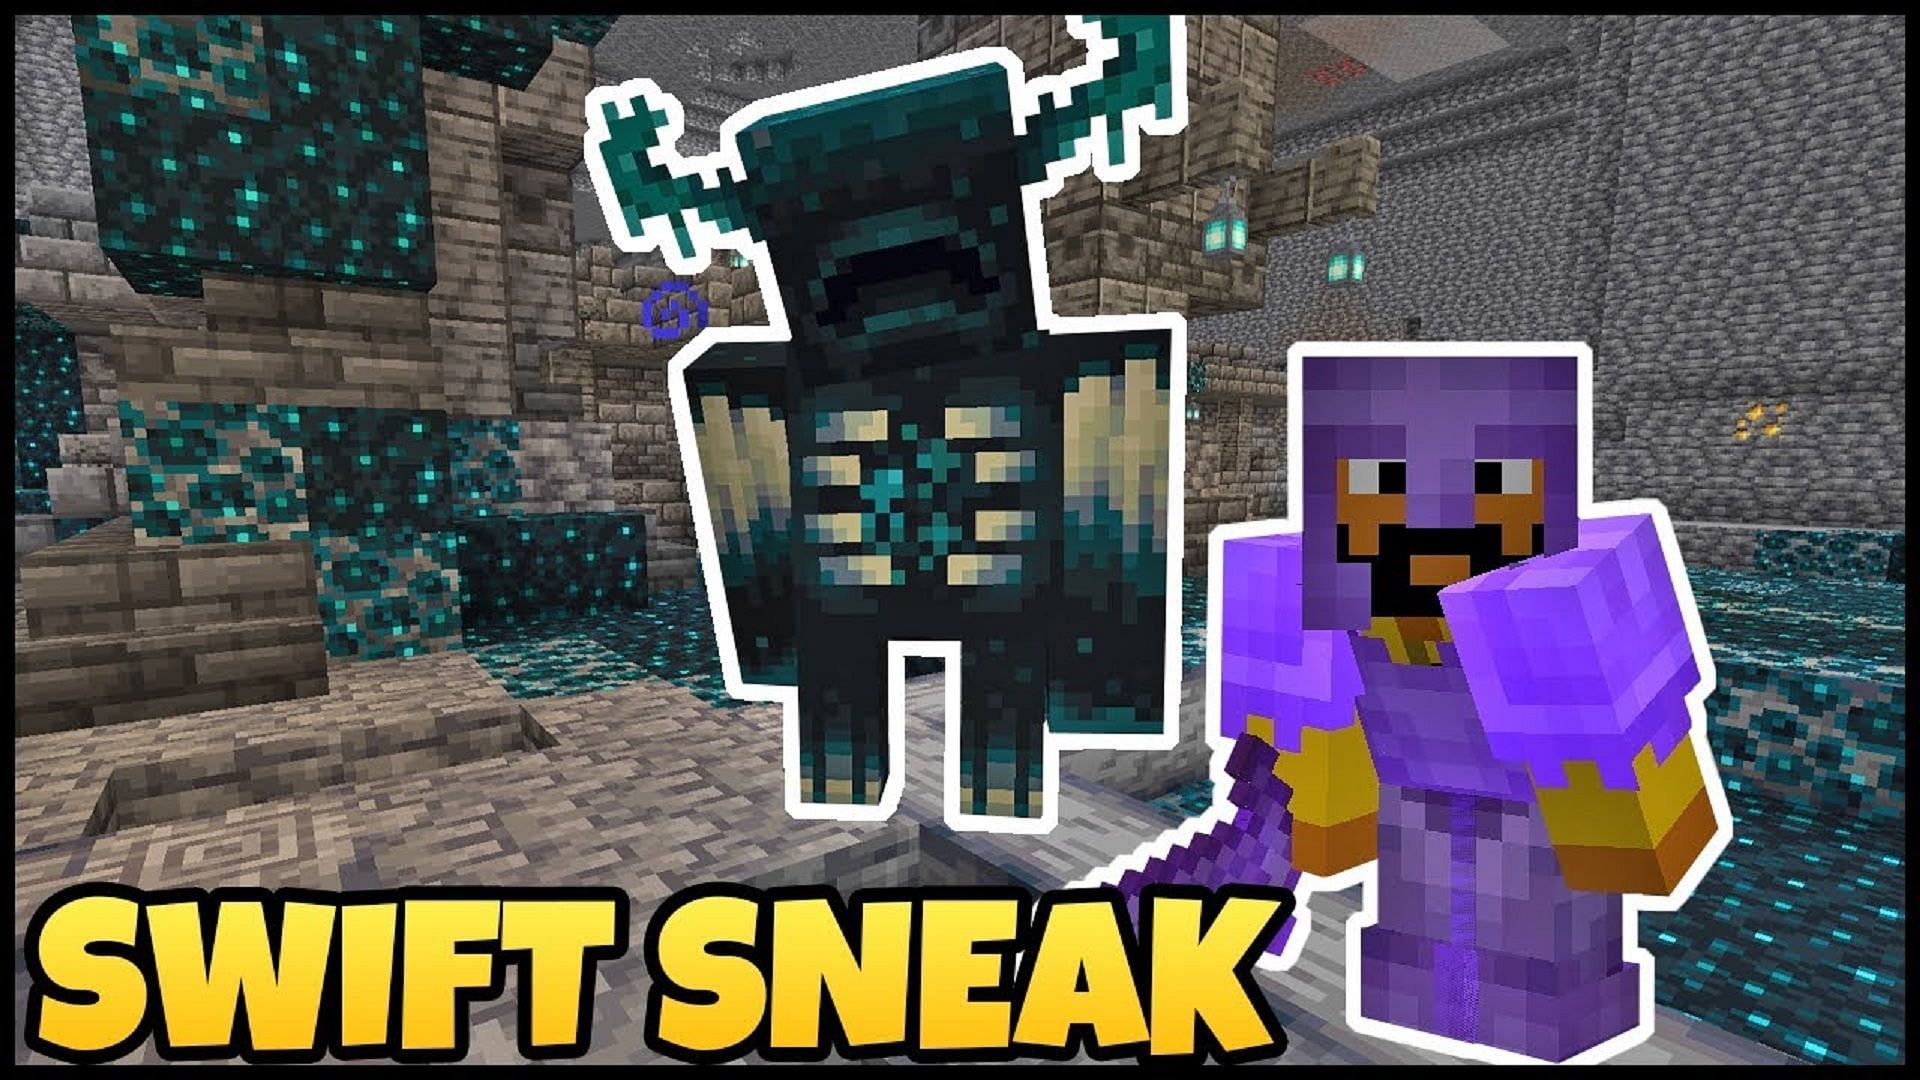 Swift Sneak is pretty solid when a Minecraft player needs to get around quietly (Image via RajCraft/YouTube)